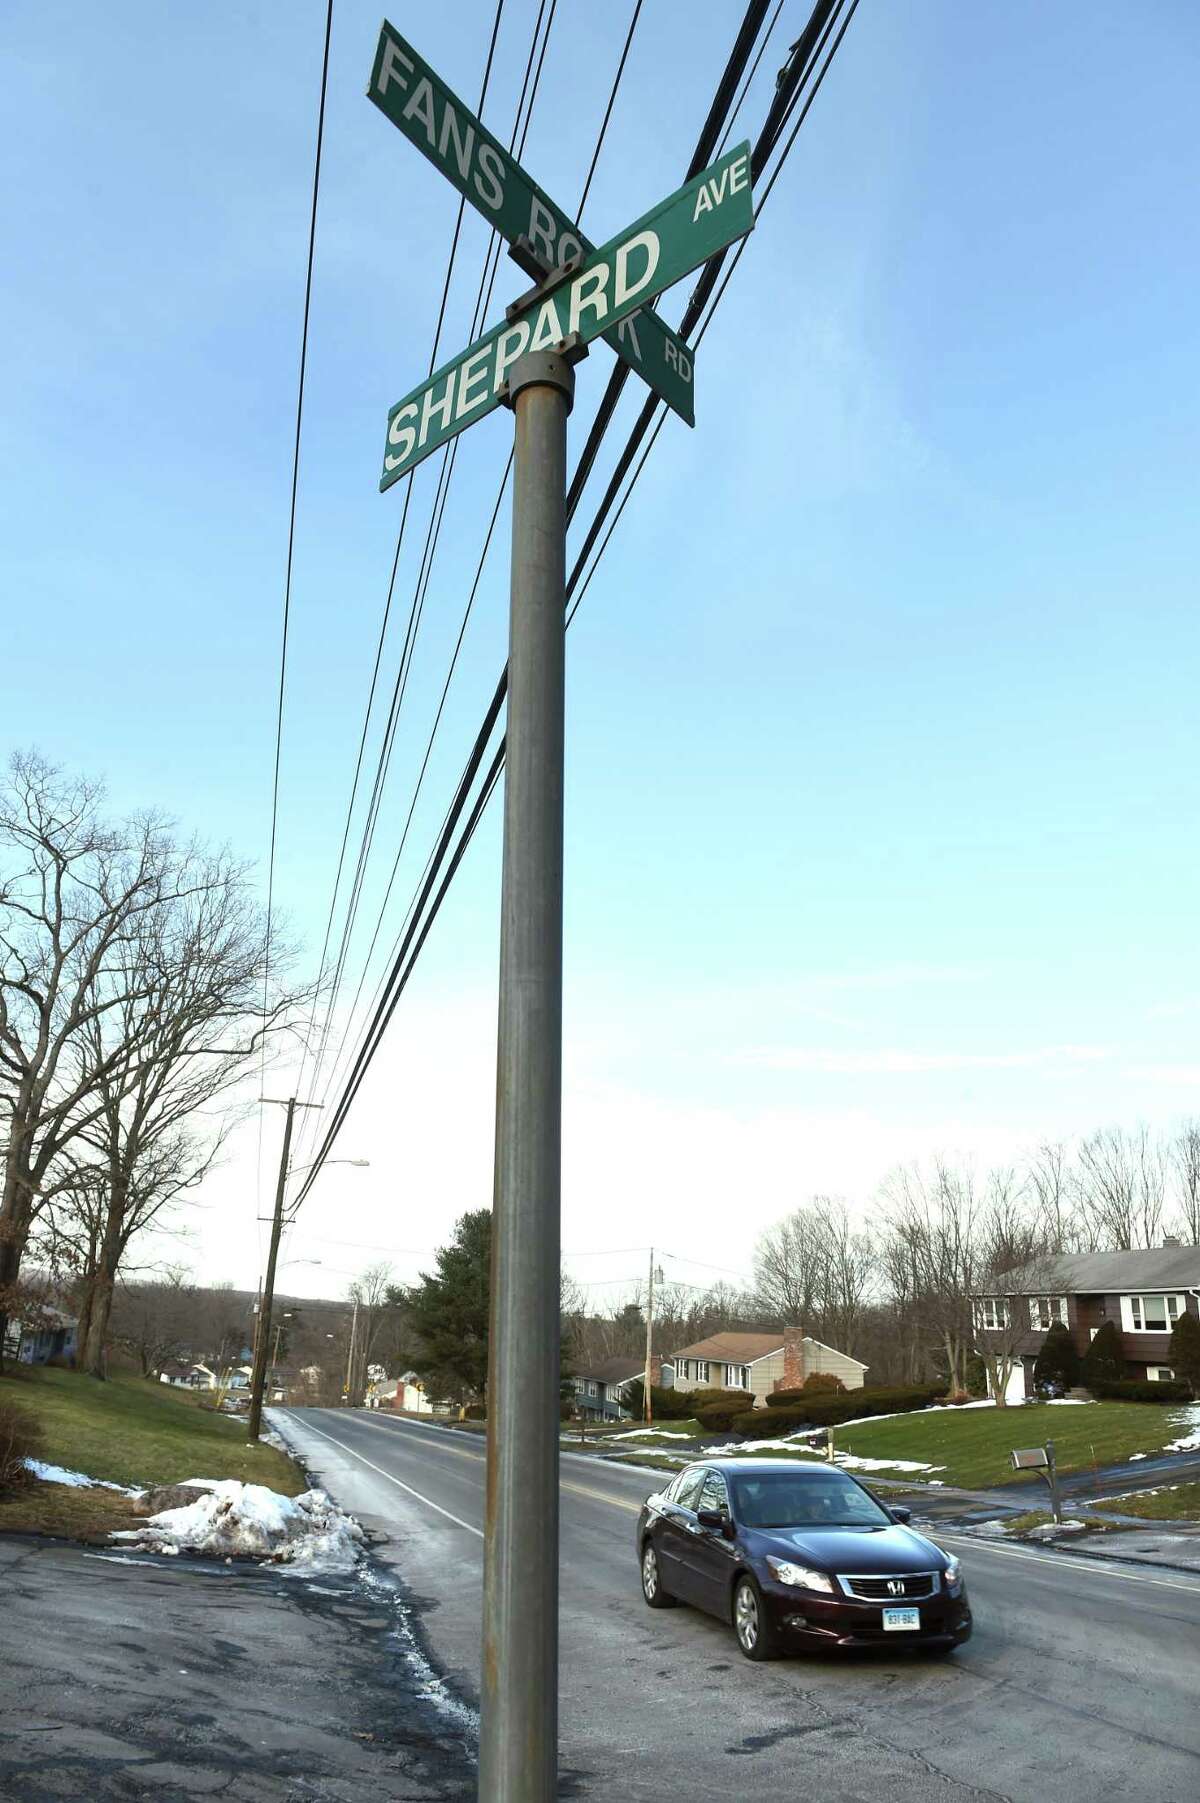 The intersection of Shepard Avenue and Fans Rock Road in Hamden photographed on Jan. 19, 2022.